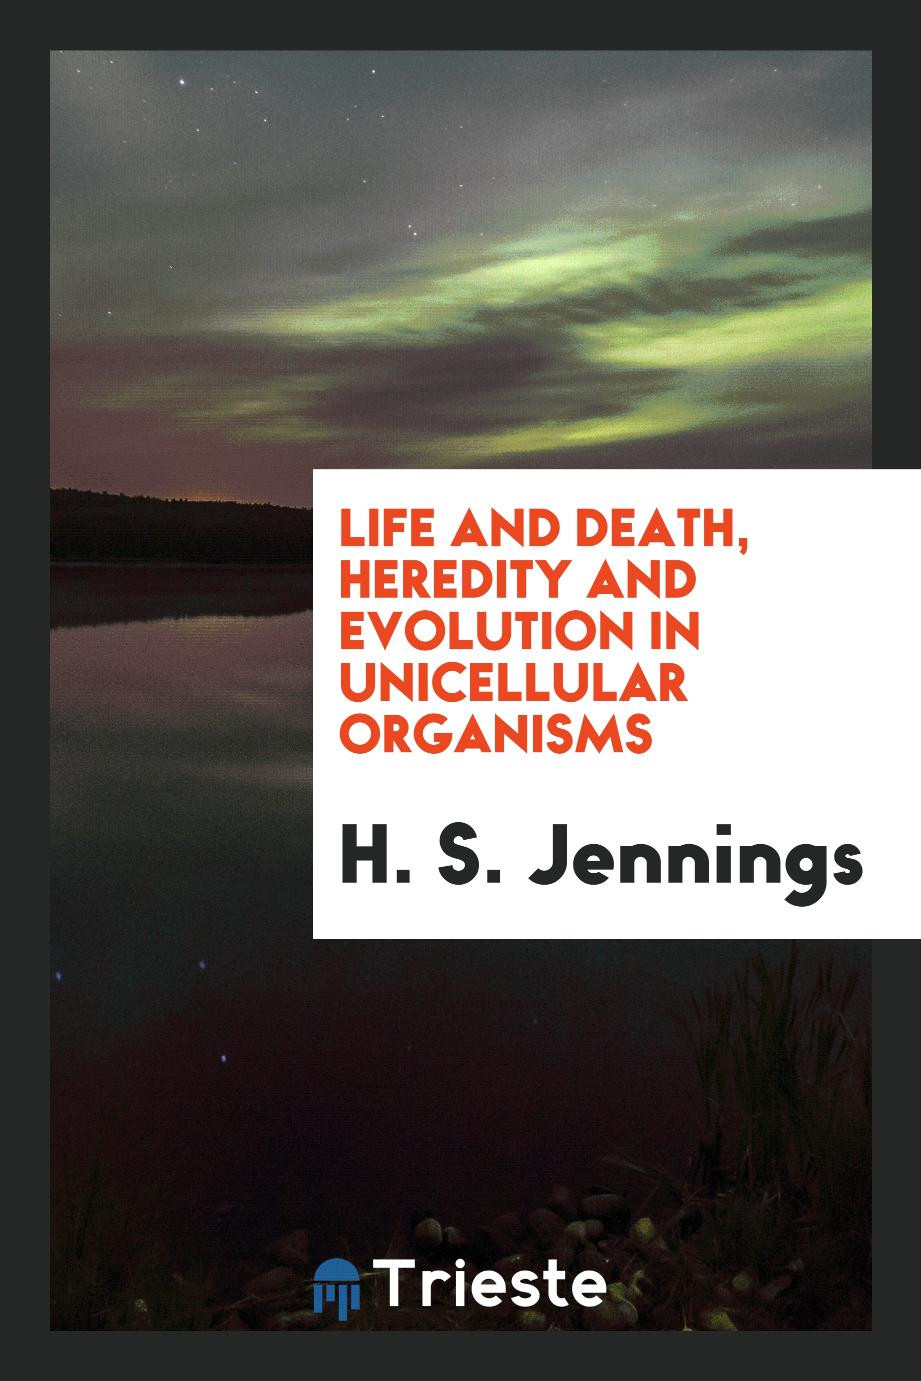 Life and death, heredity and evolution in unicellular organisms